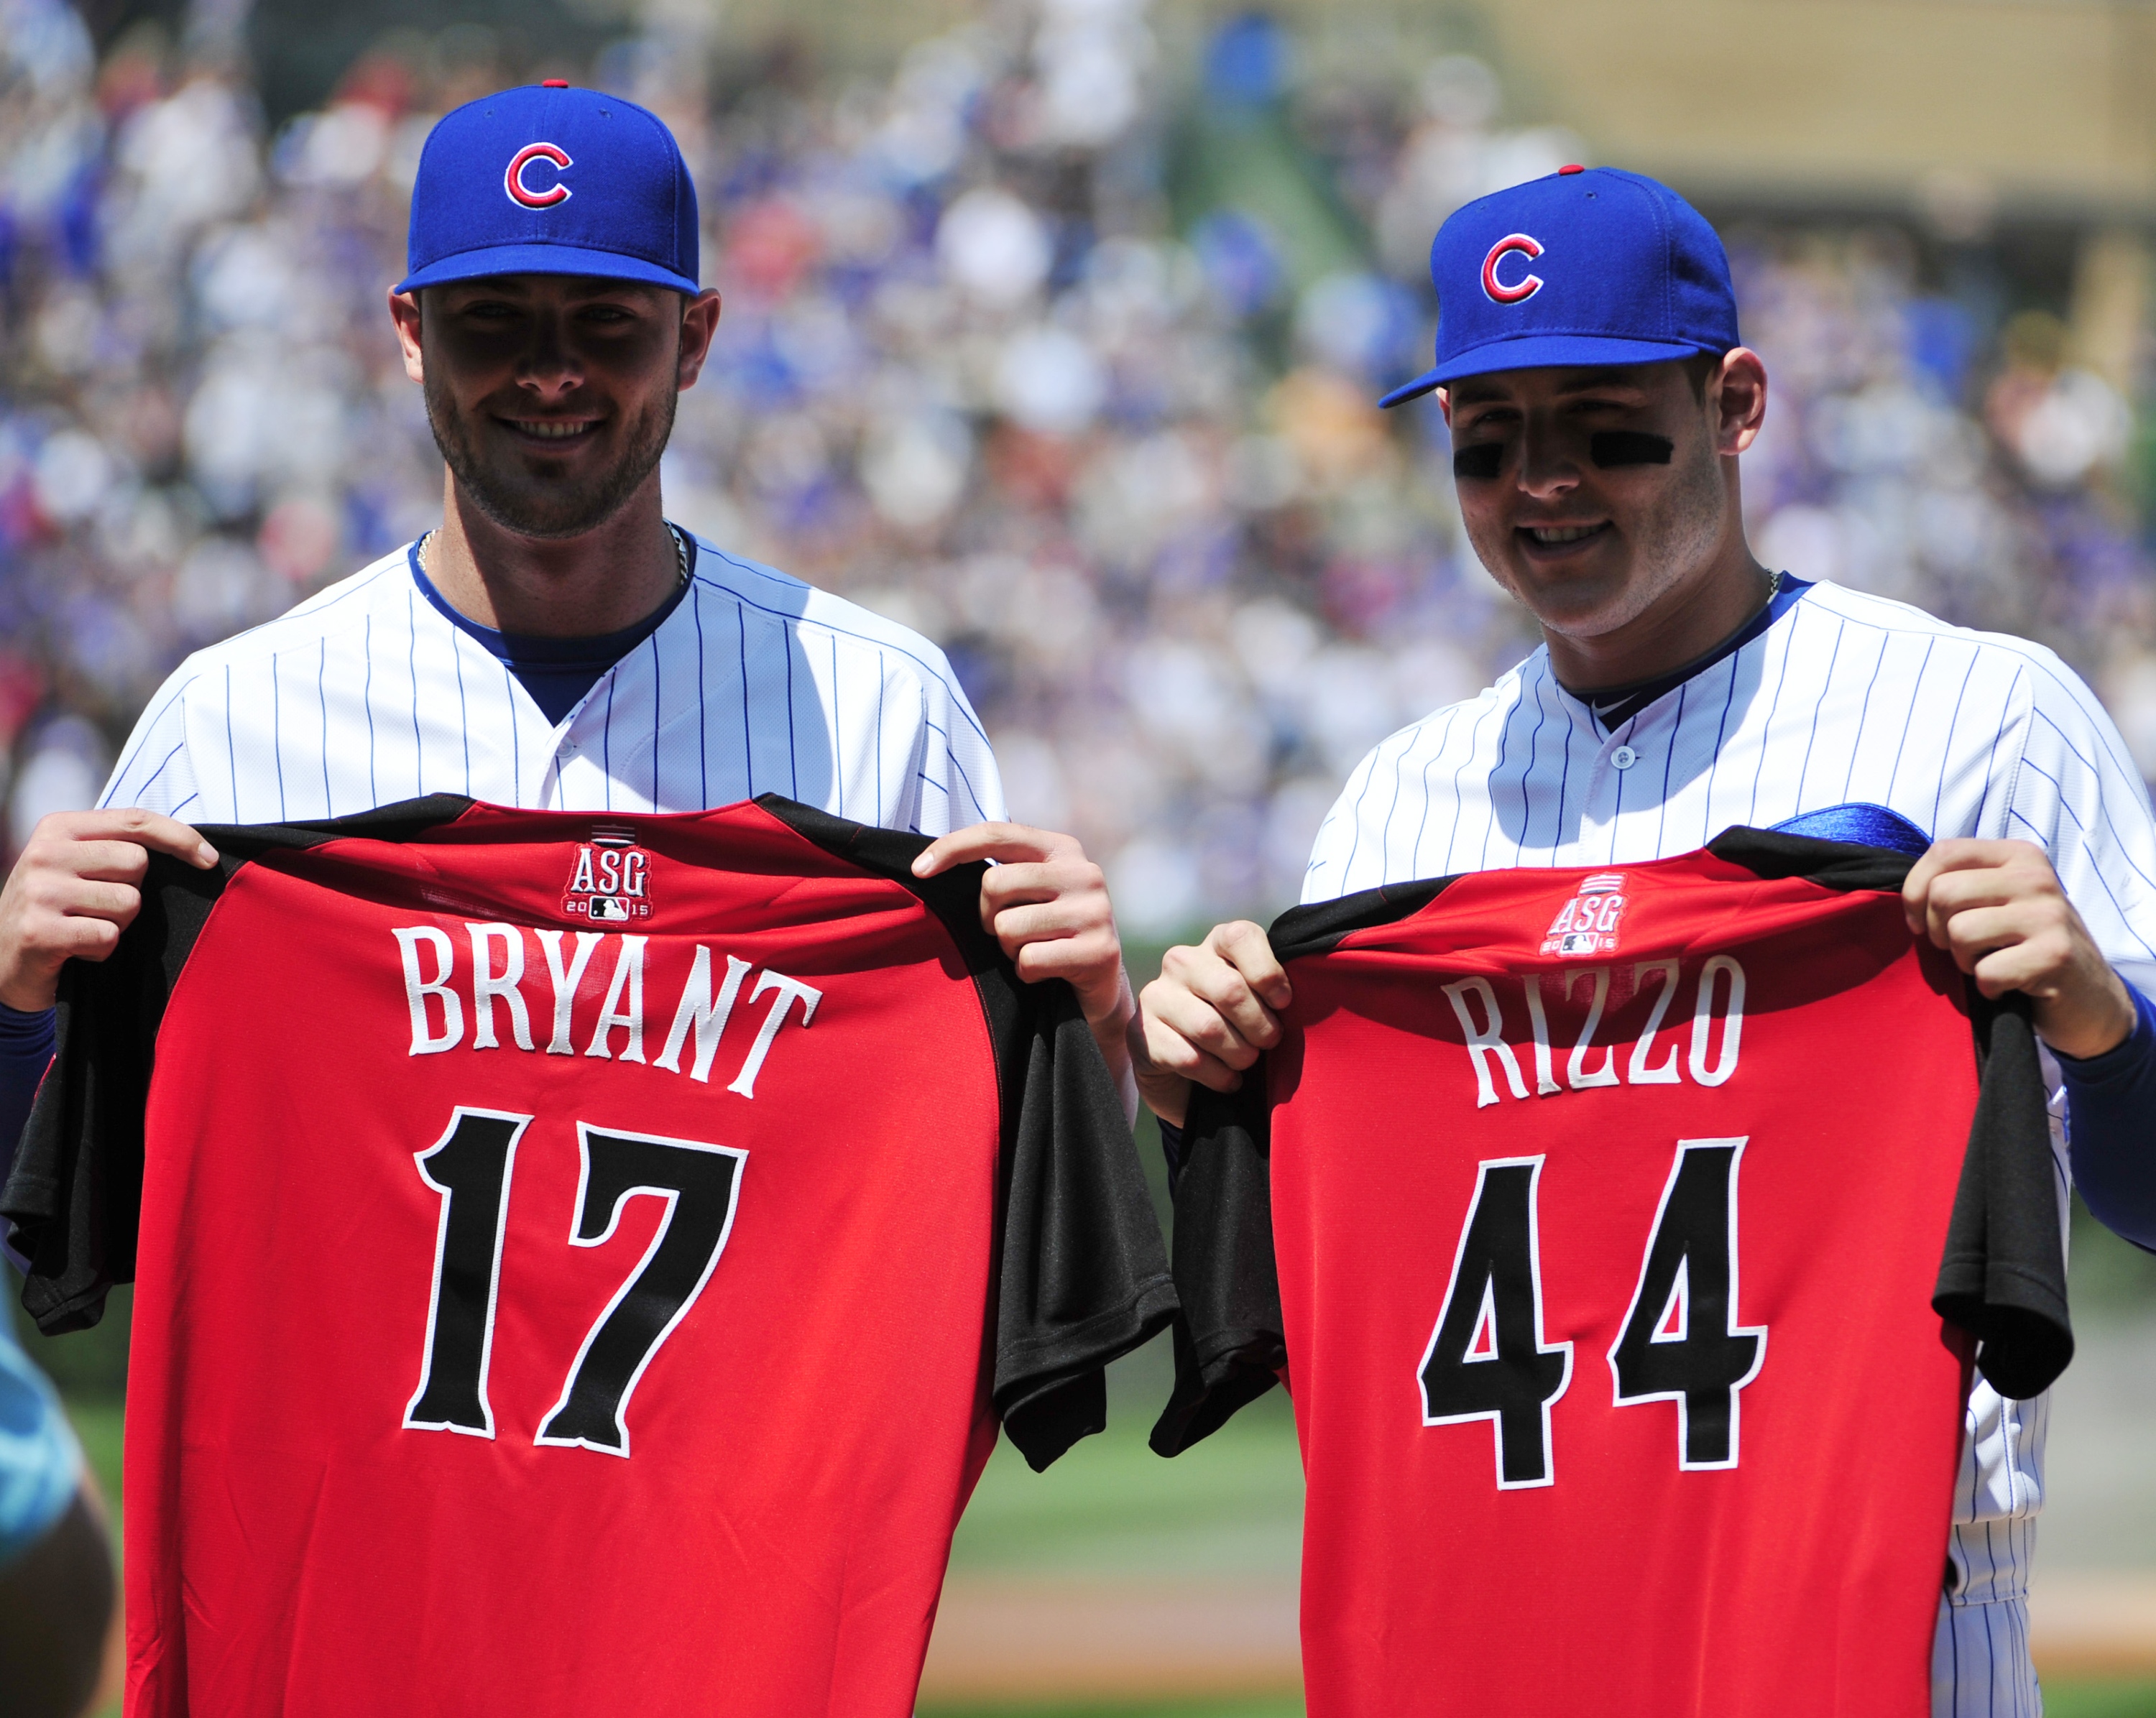 CHICAGO, IL - JULY 10: Kris Bryant #17 of the Chicago Cubs and Anthony Rizzo #44 pose for a photo with their All Star jersey's before the game against the Chicago White Sox on July 10, 2015 at  Wrigley Field in Chicago, Illinois. (Photo by David Banks/Getty Images)